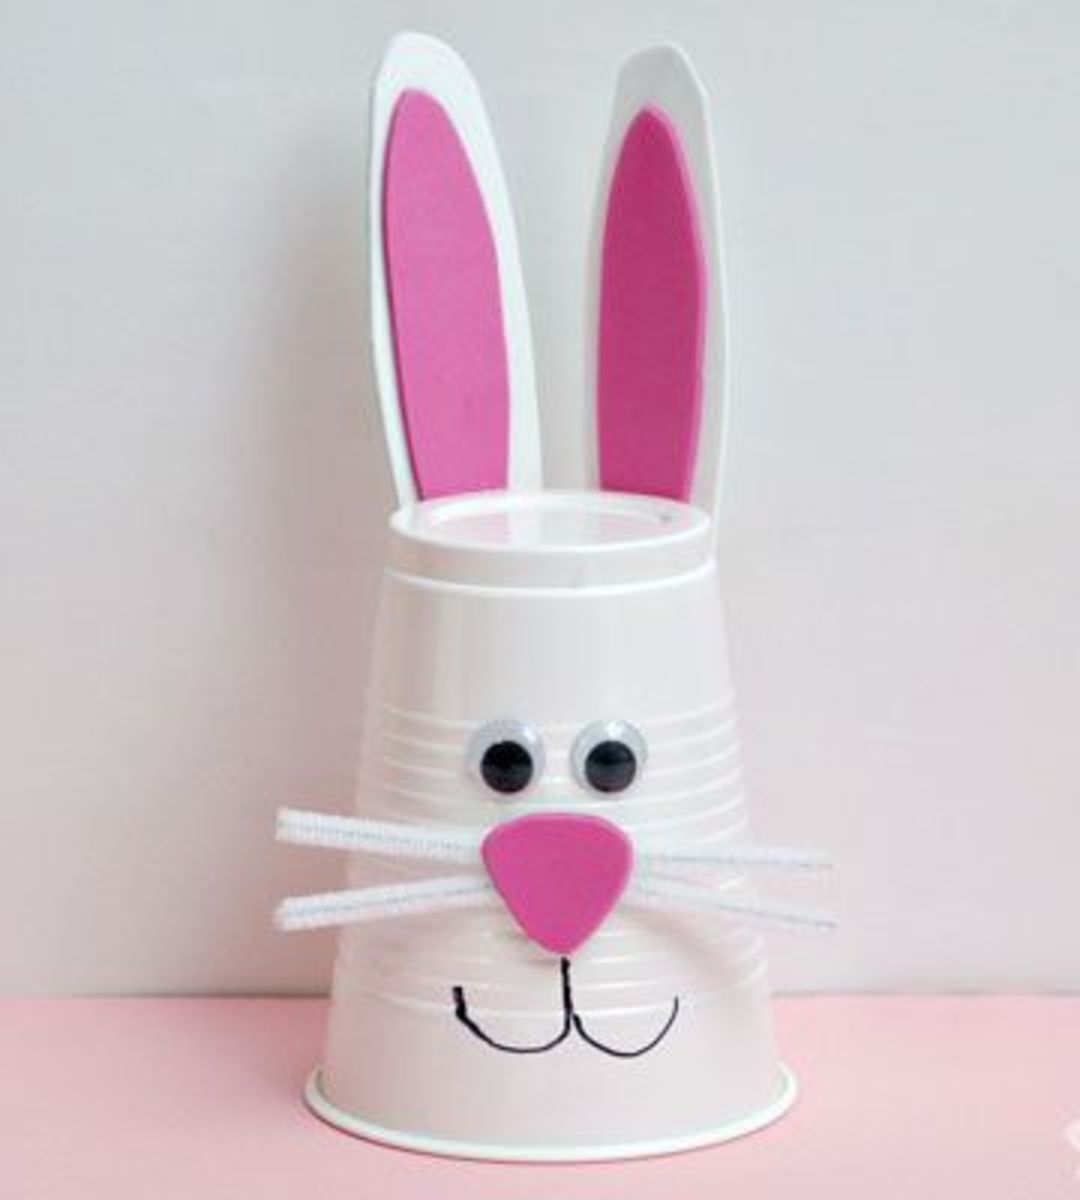 How to make a Straw Bunny - Fun Easter Craft for Kids 